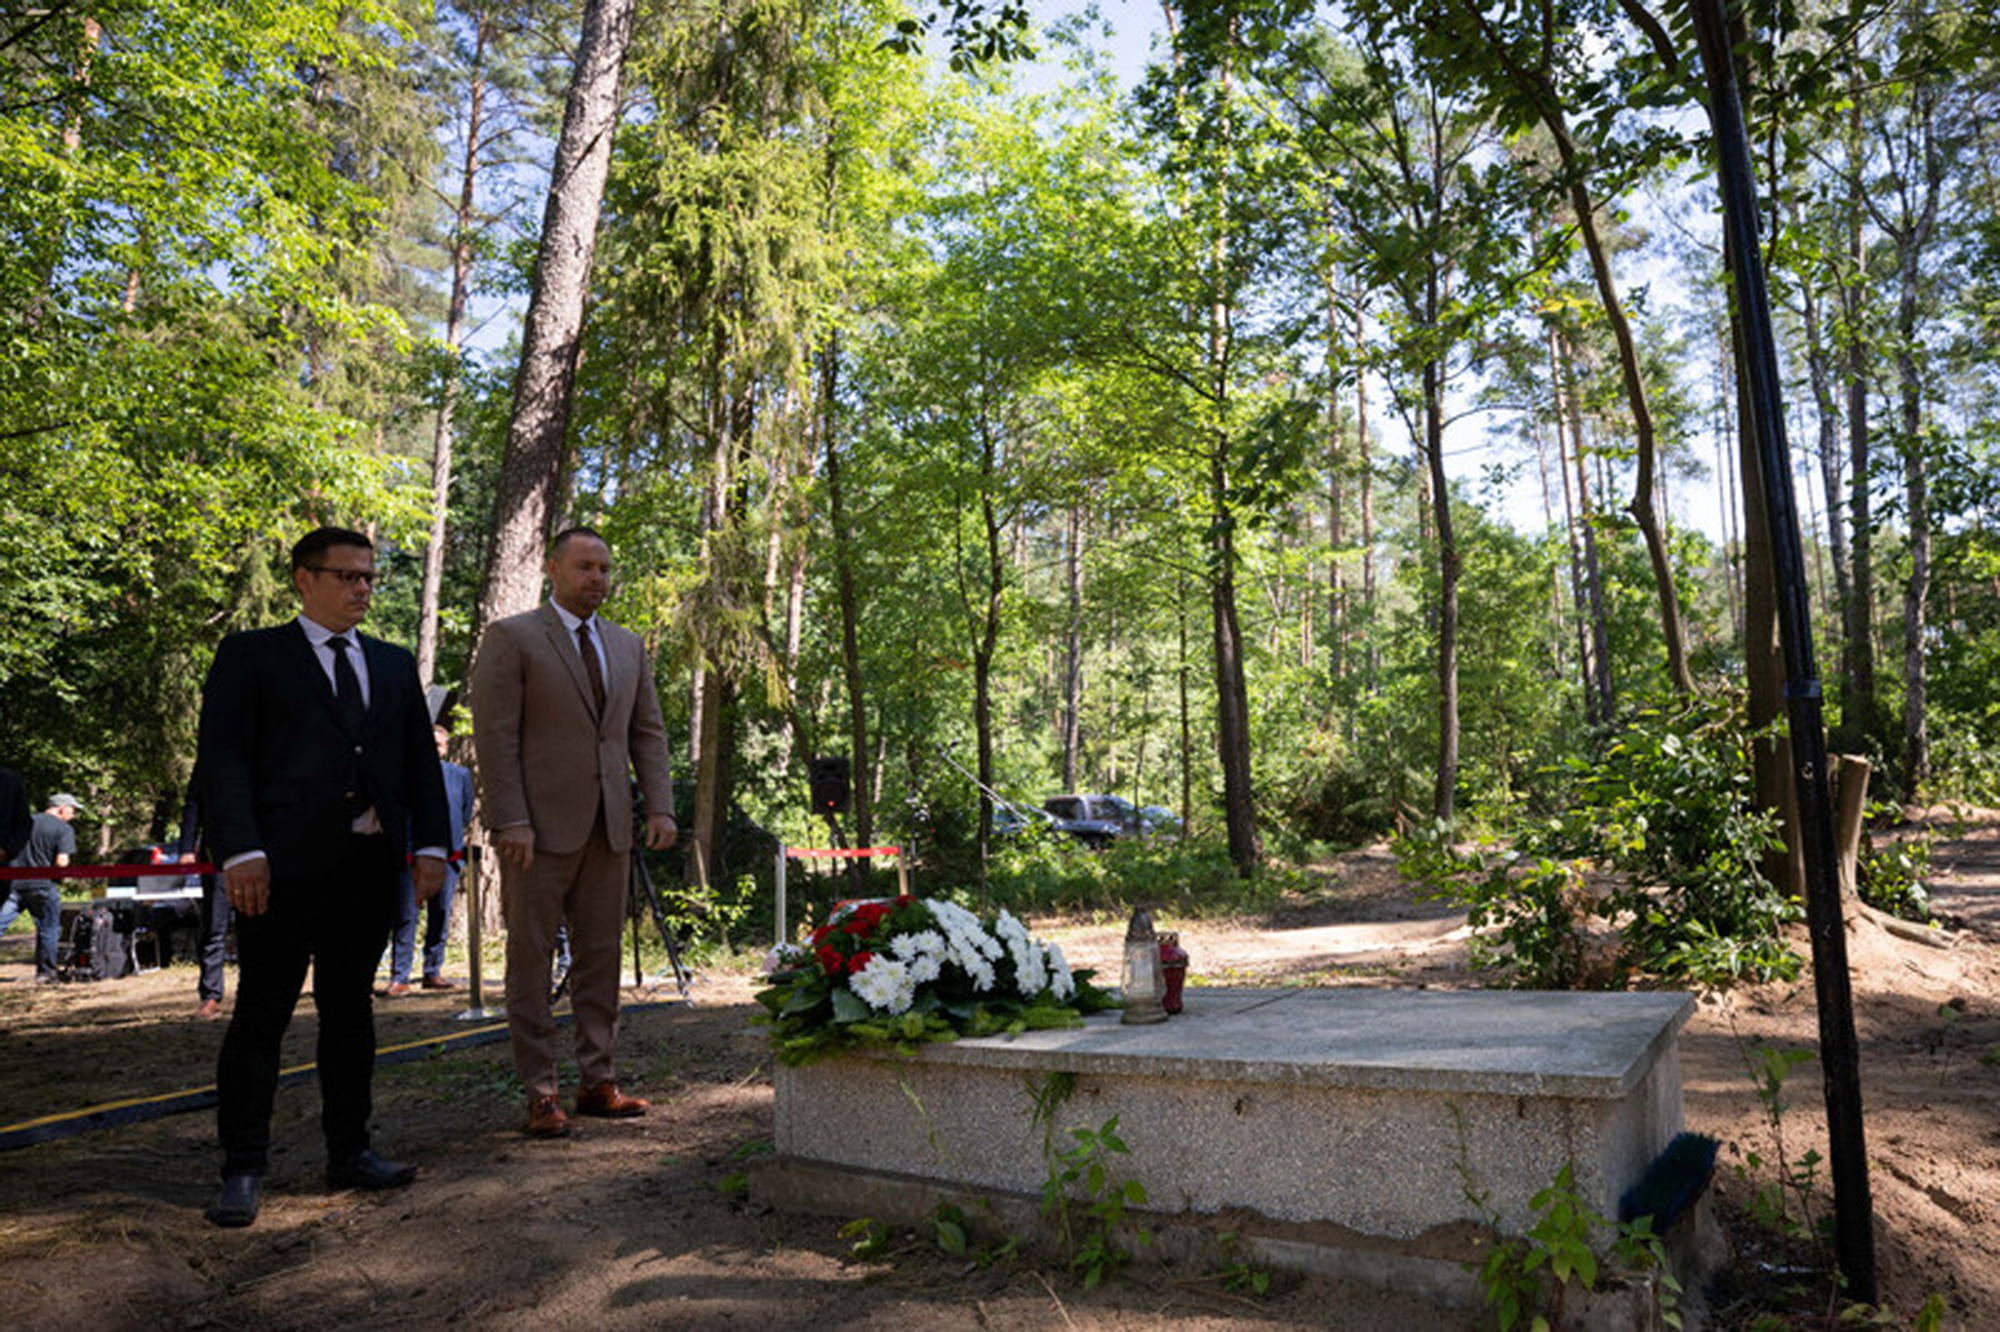 Karol Nawrocki, right, head of the Institute of National Remembrance (IPN), stands in front of a grave as he meets the media near Działdowo, Poland, Wednesday, July 13, 2022. Special investigators in Poland say they have found mass graves containing the ashes of at least 8,000 Poles slain by Nazi Germans during World War II in forest executions. The occupying Nazis tried to hide the killings by incinerating the bodies and planting trees on the burial pits. (Mikolaj Bujak/Institute of National Remembrance via AP)